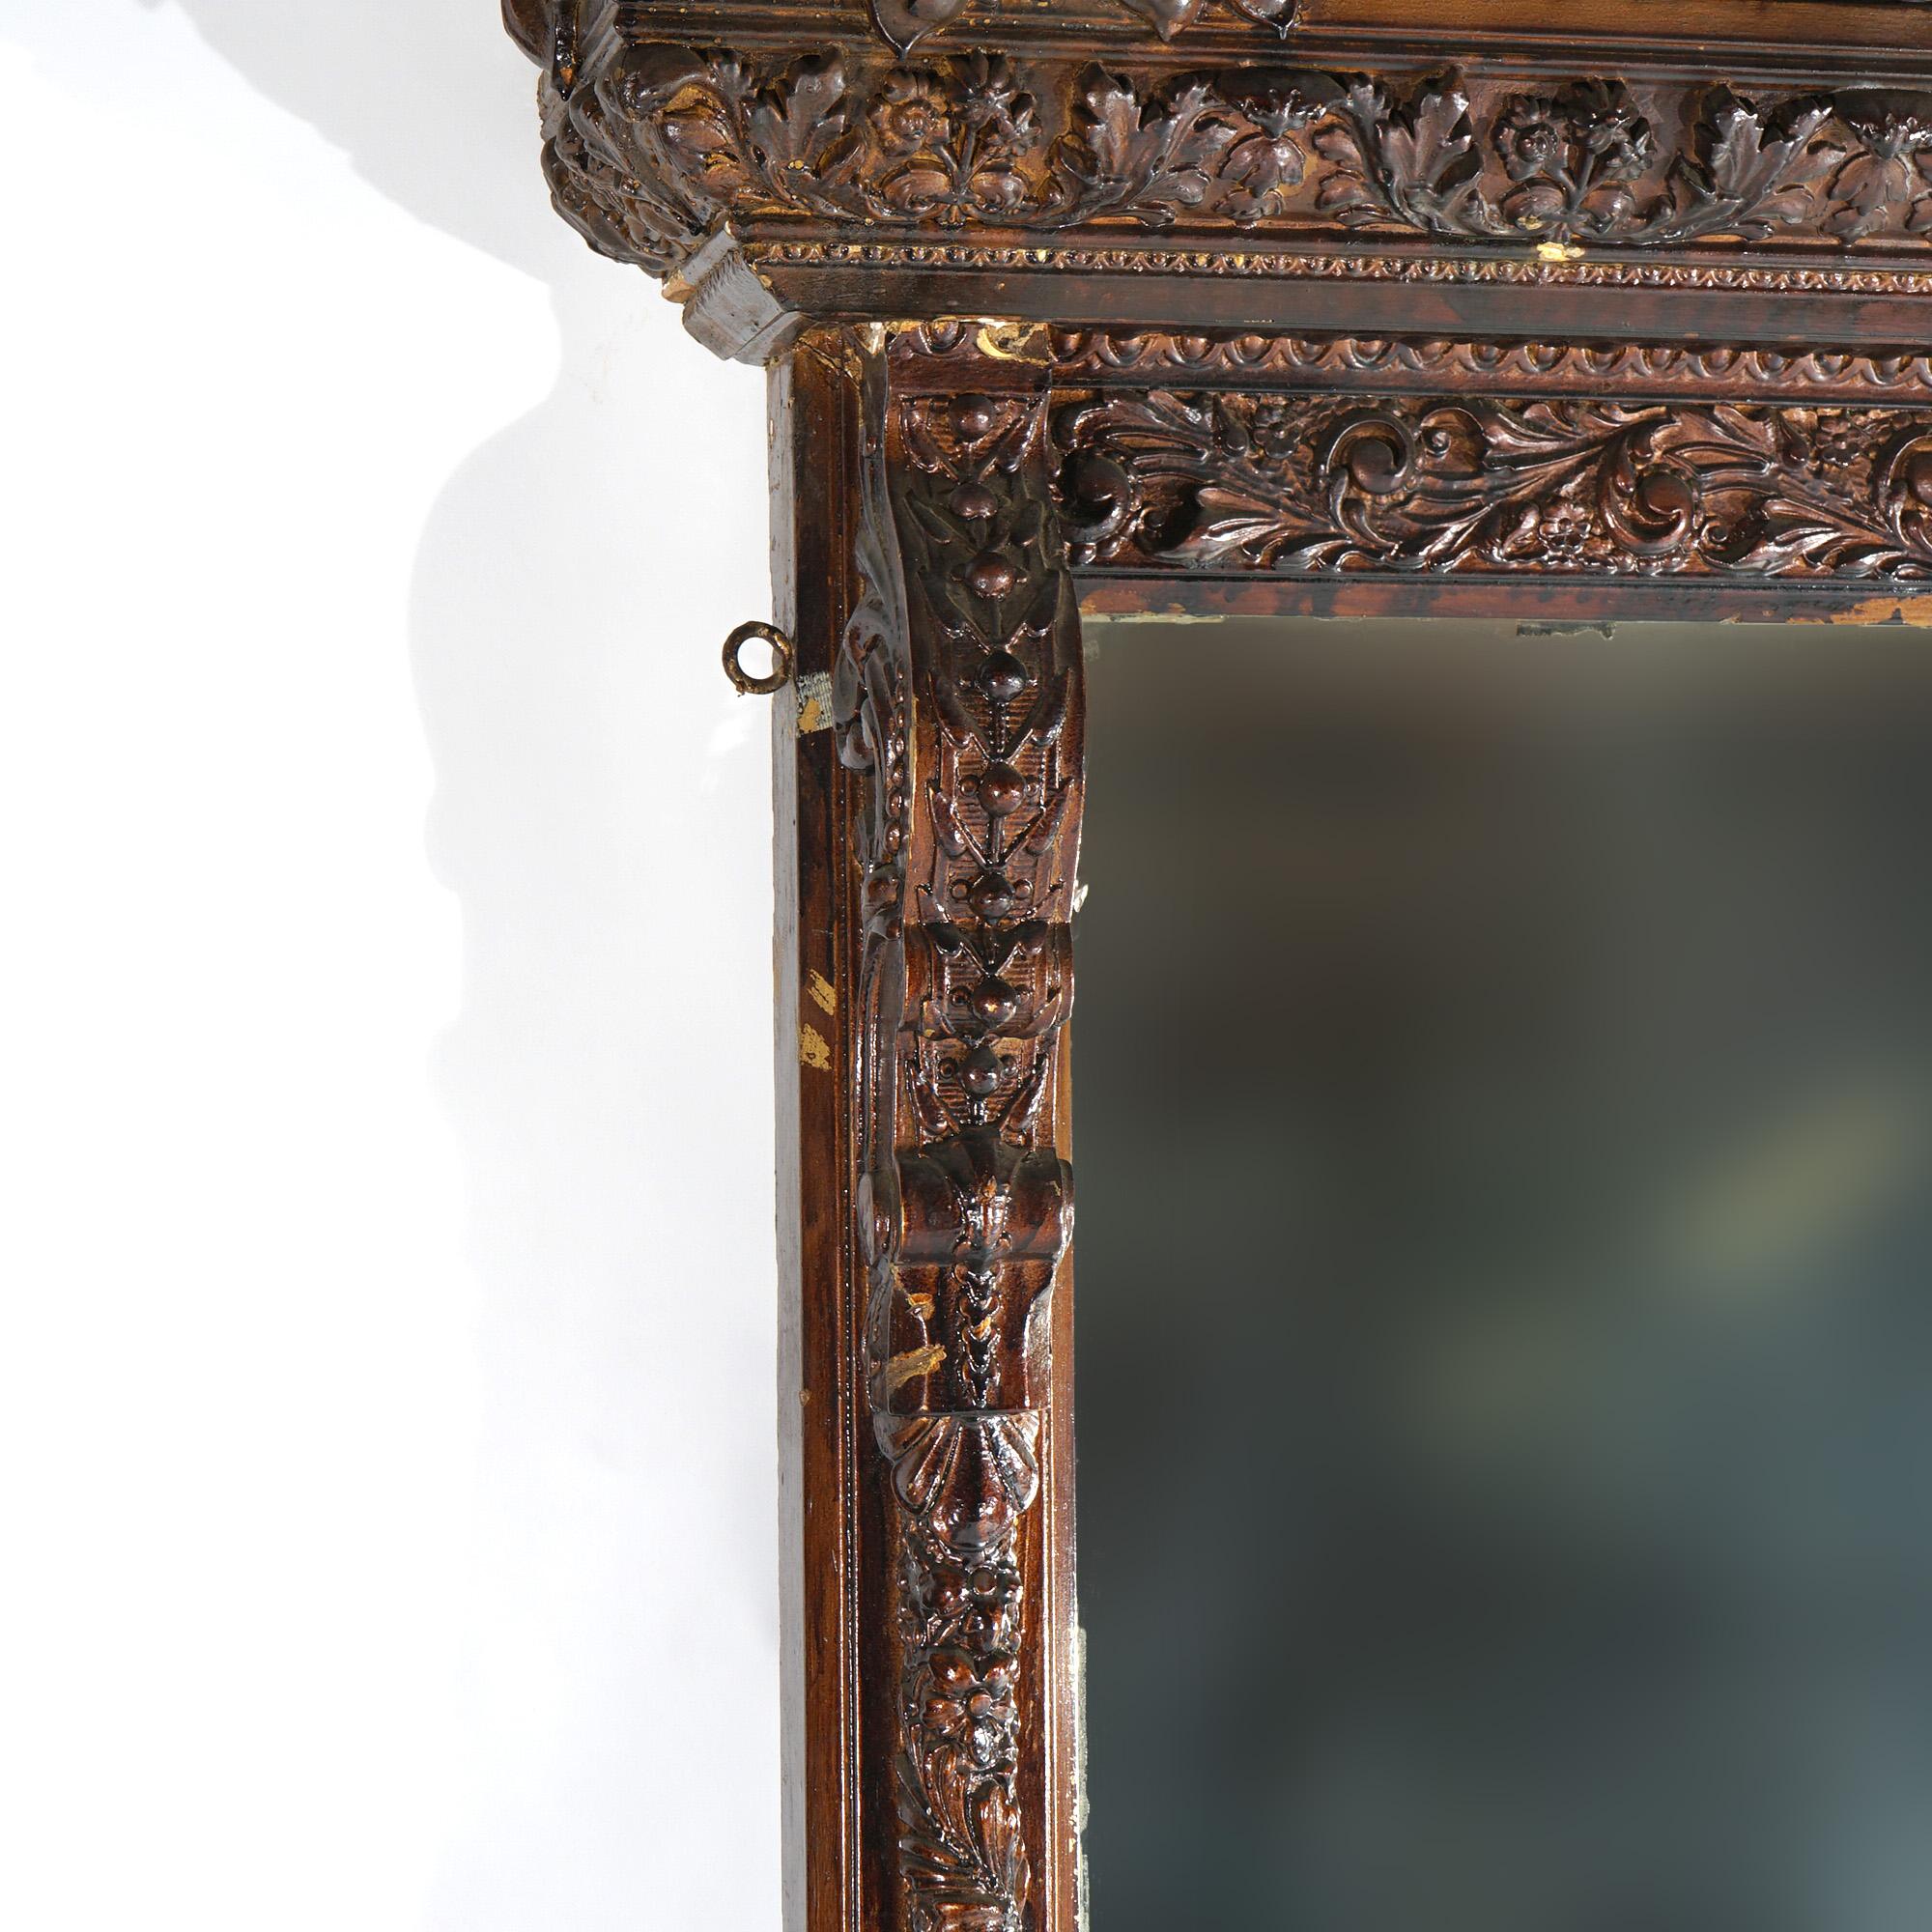 Antique Renaissance Revival Heavily Carved Wood & Gesso Over Mantle Mirror 19thC For Sale 4